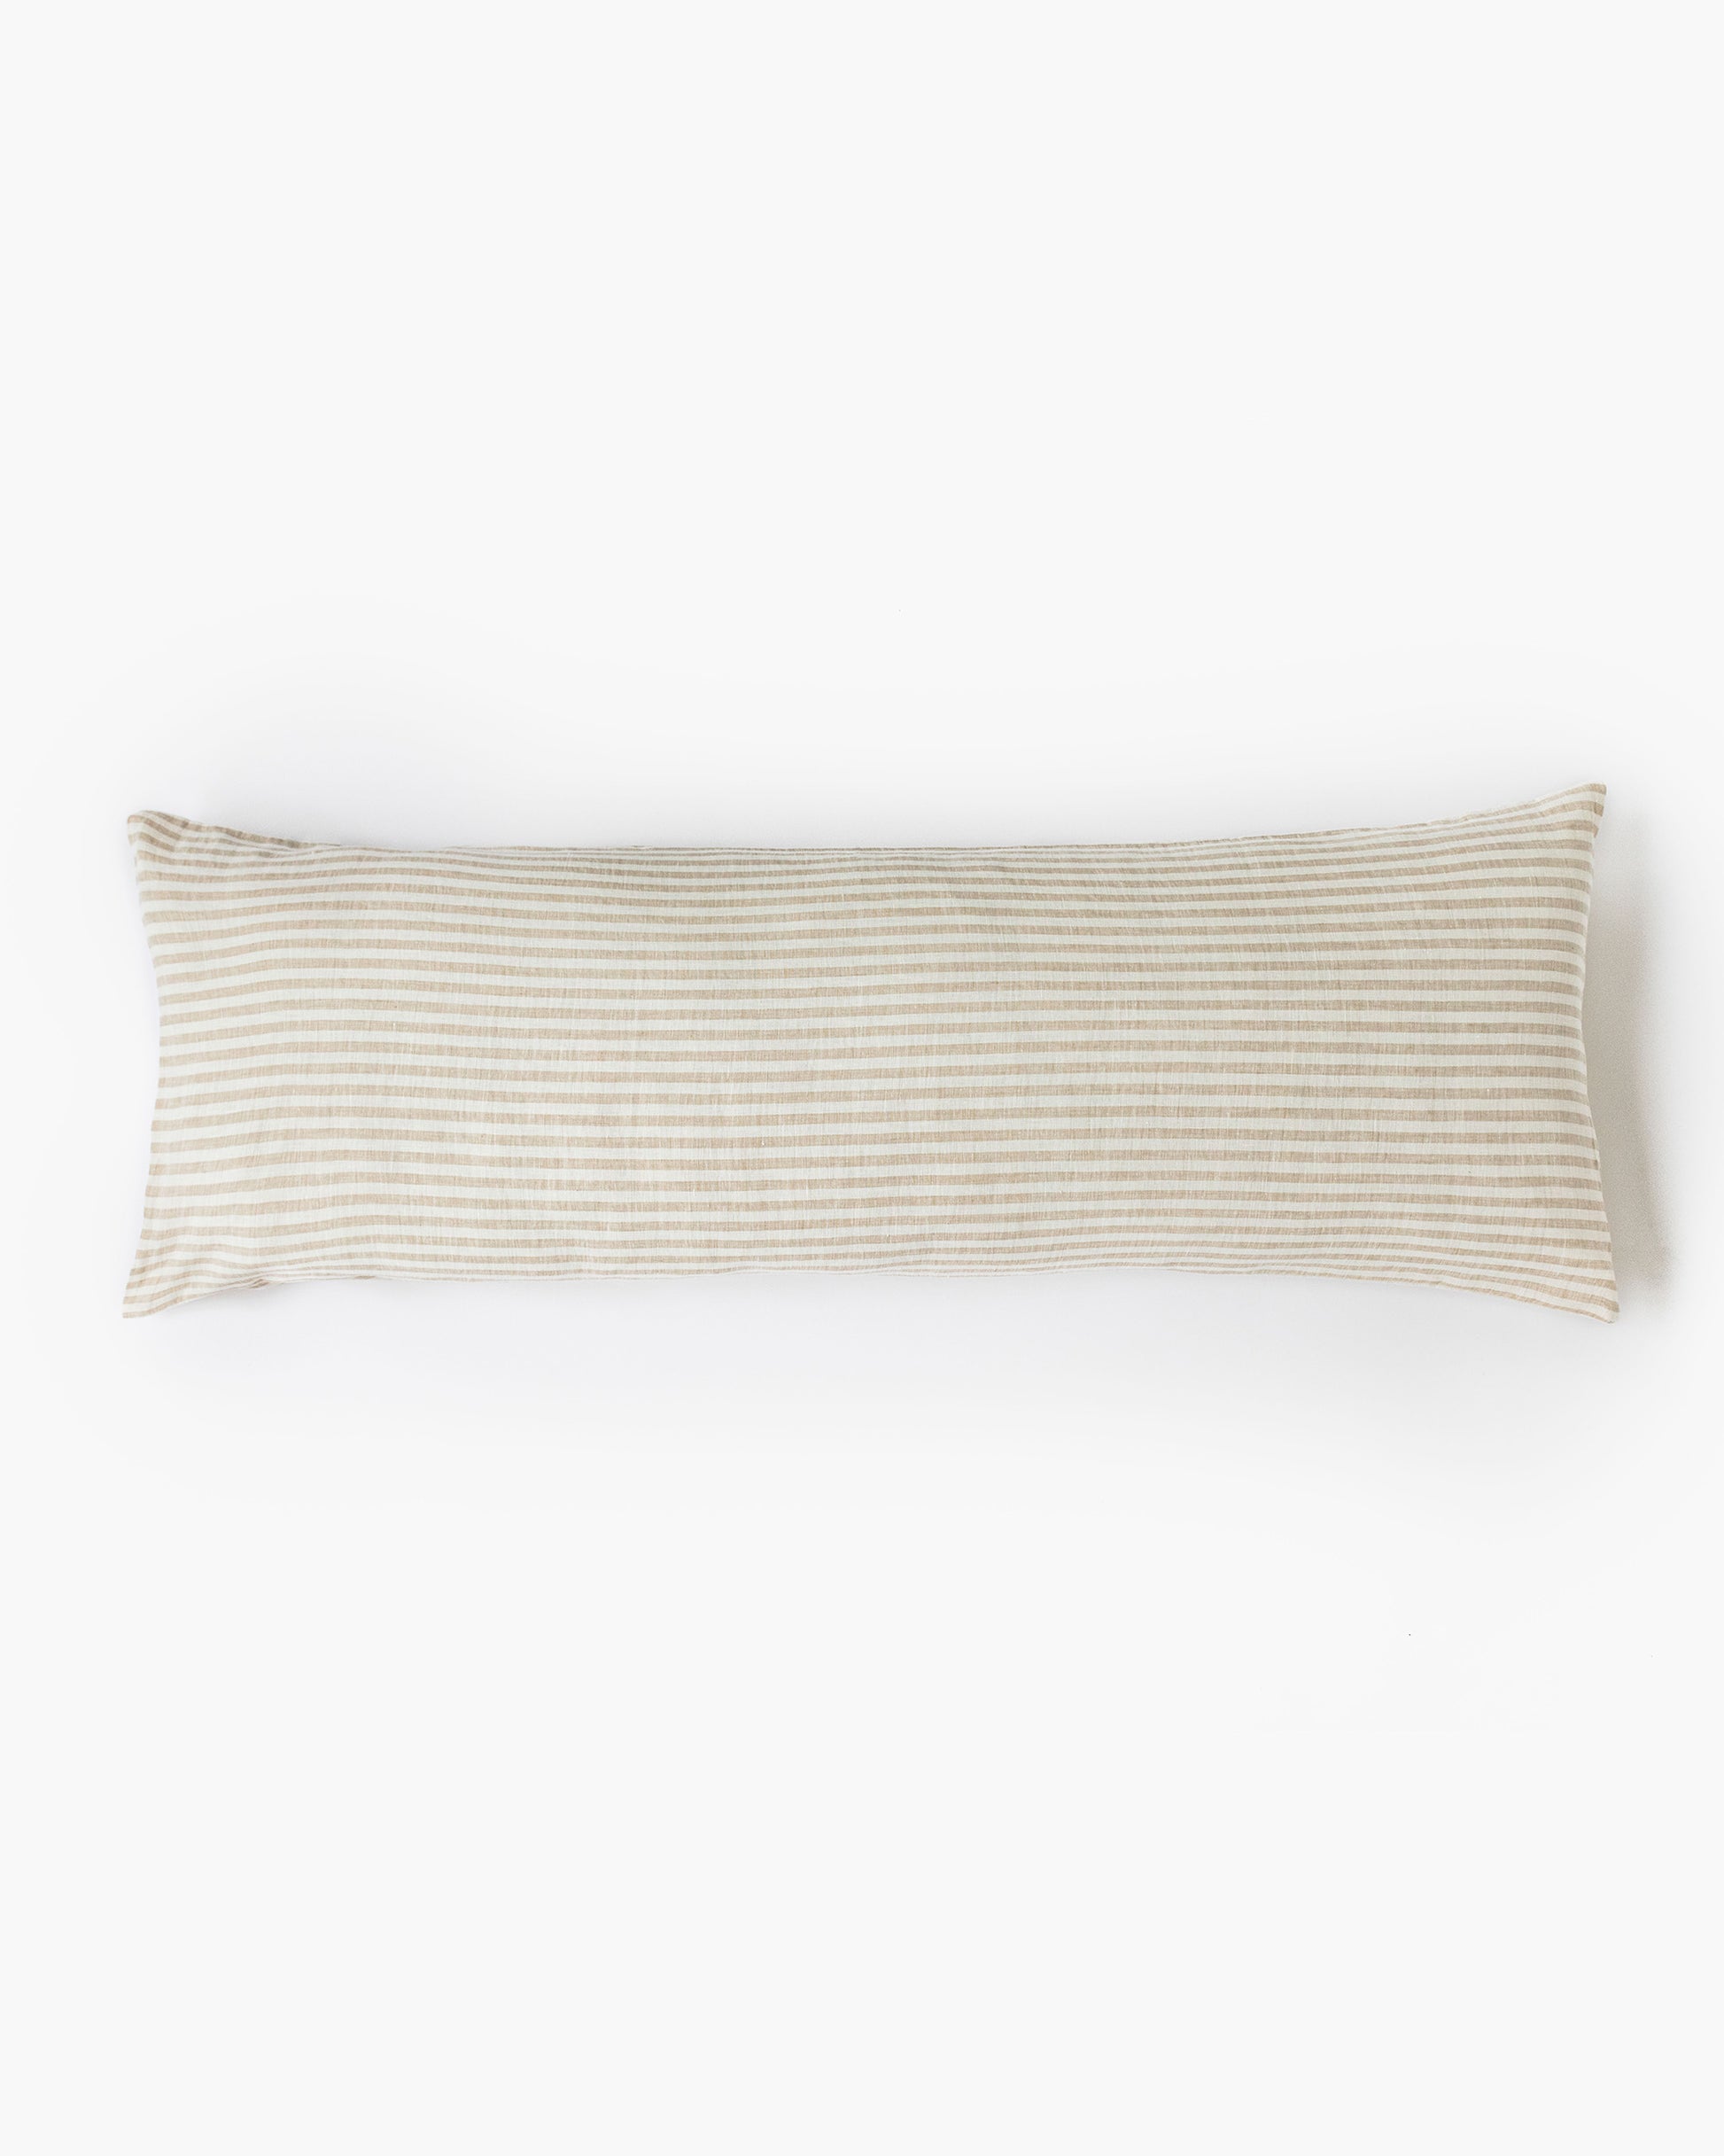 Body pillowcase in Striped in natural - MagicLinen